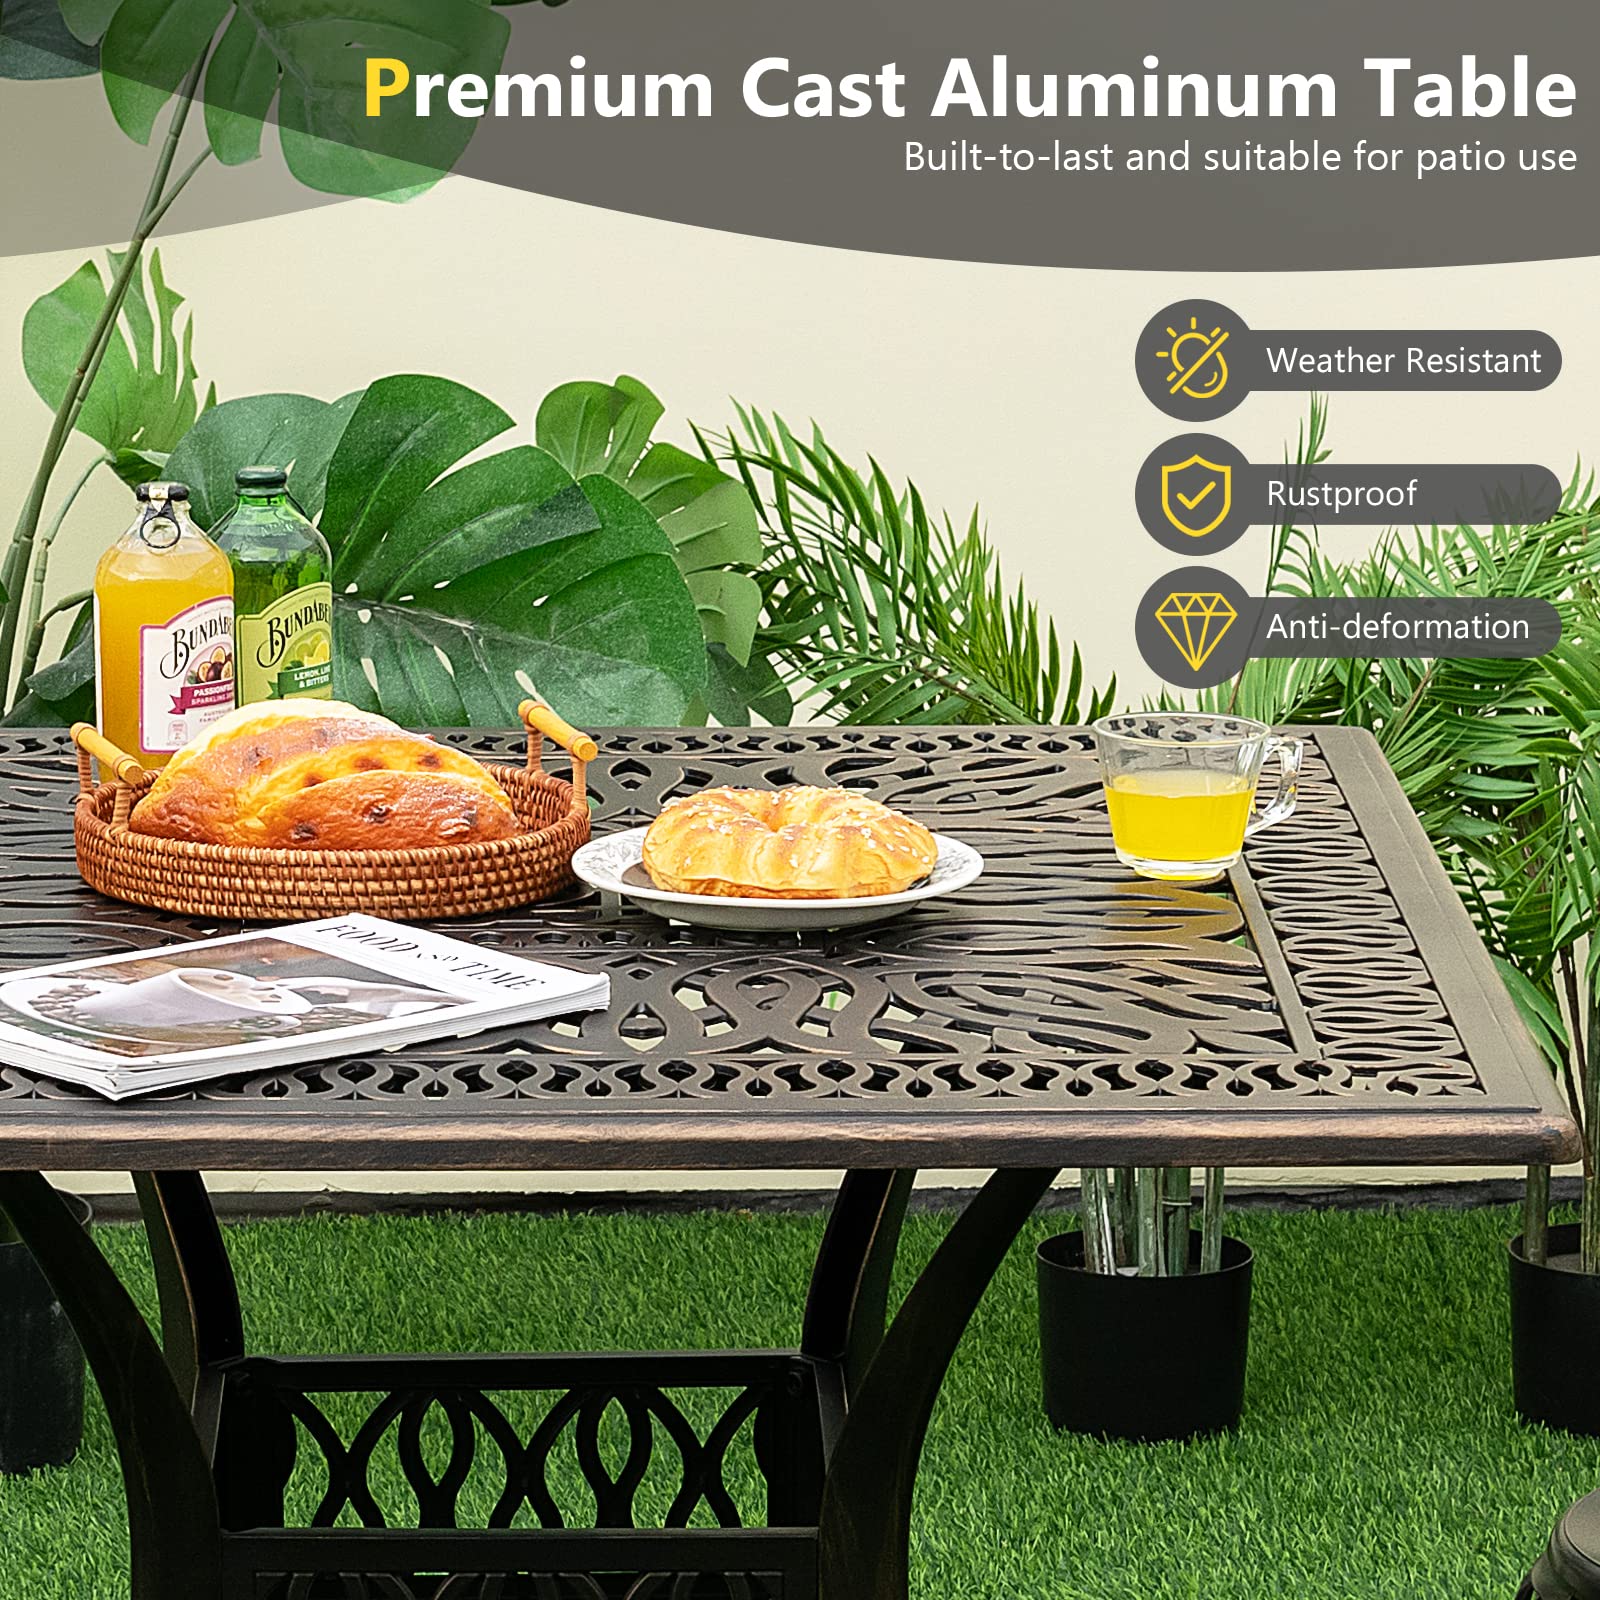 Giantex Patio Dining Table, Cast Aluminum Outdoor Table for 4 Persons